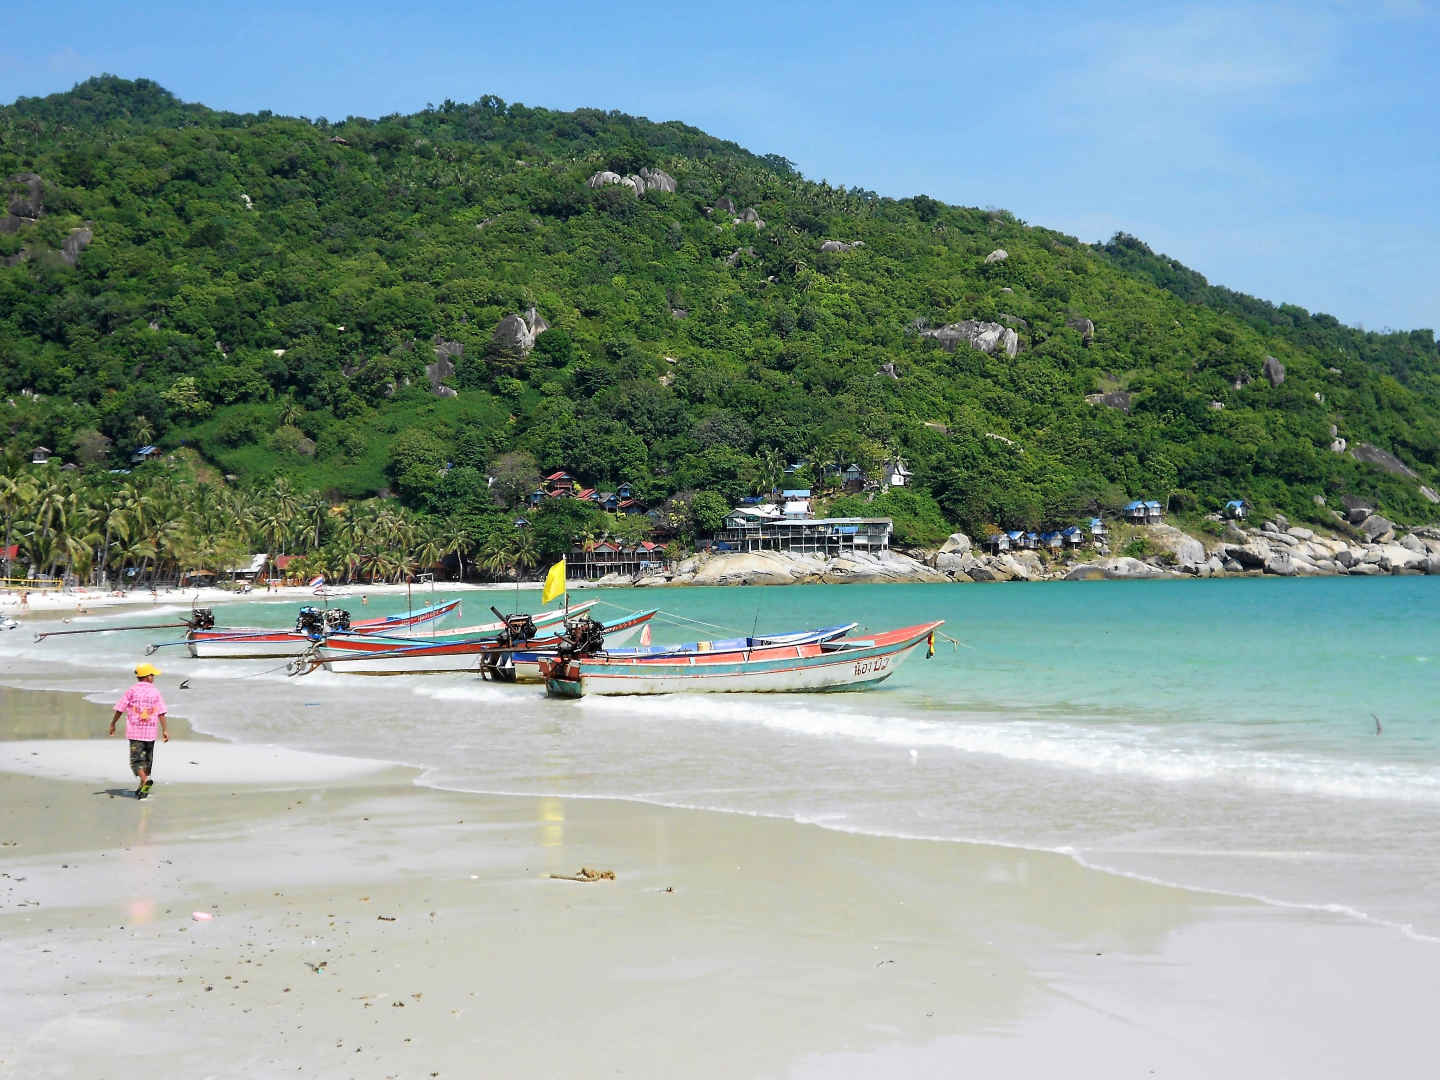 This is the Best Backpacking Thailand Route for Beach Lovers